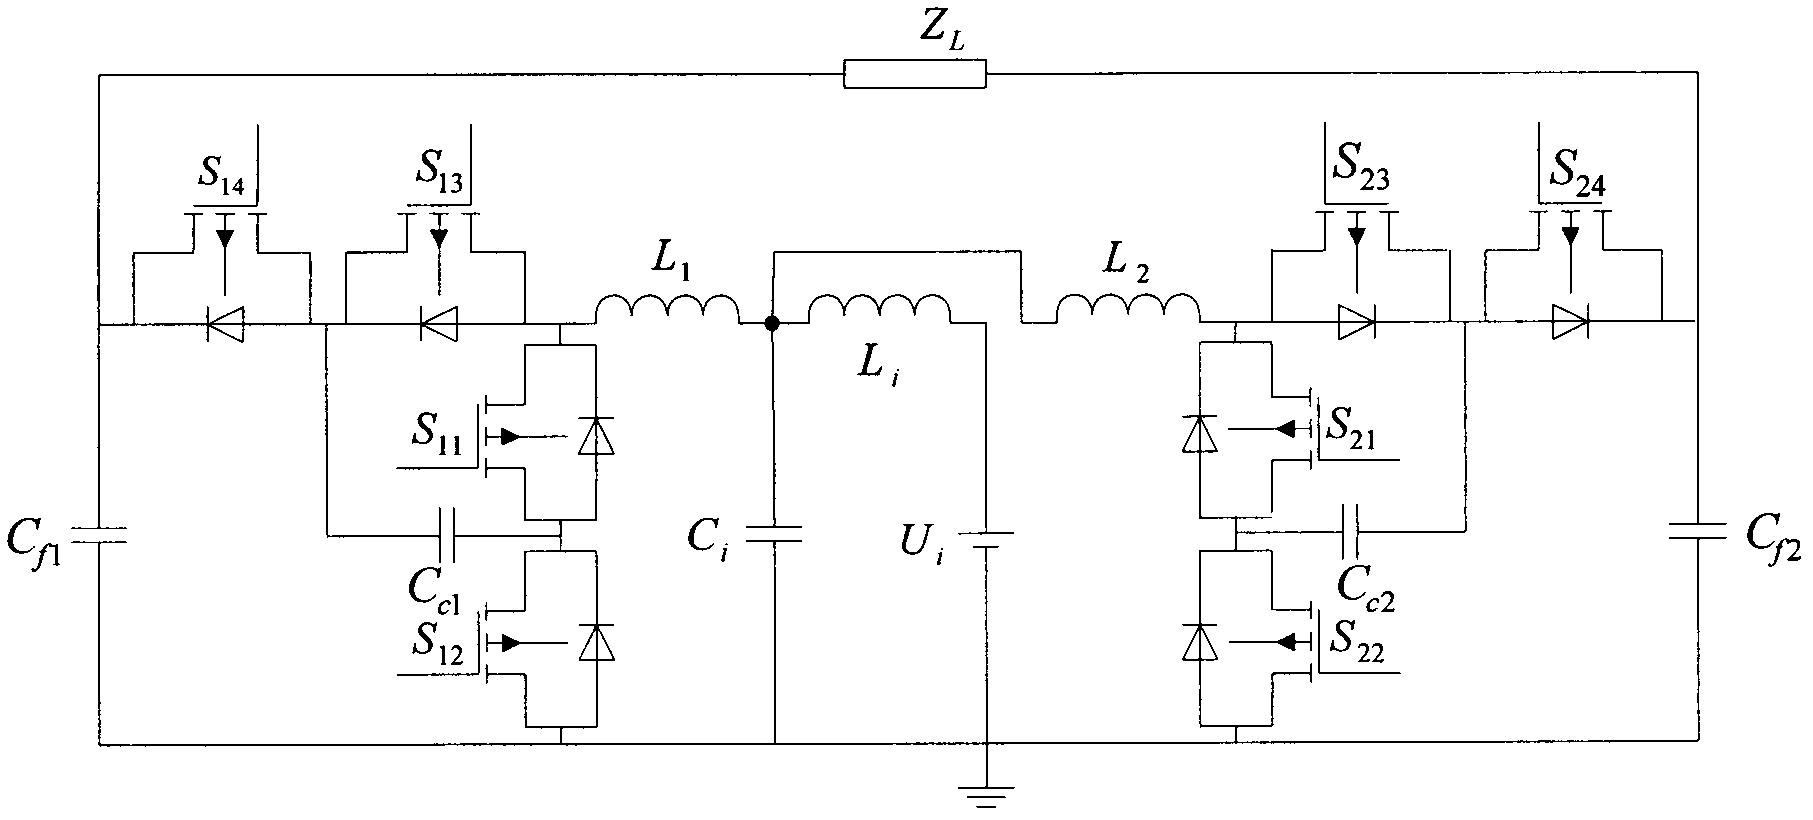 Non-isolated direct-current converter type differential three-level inverter